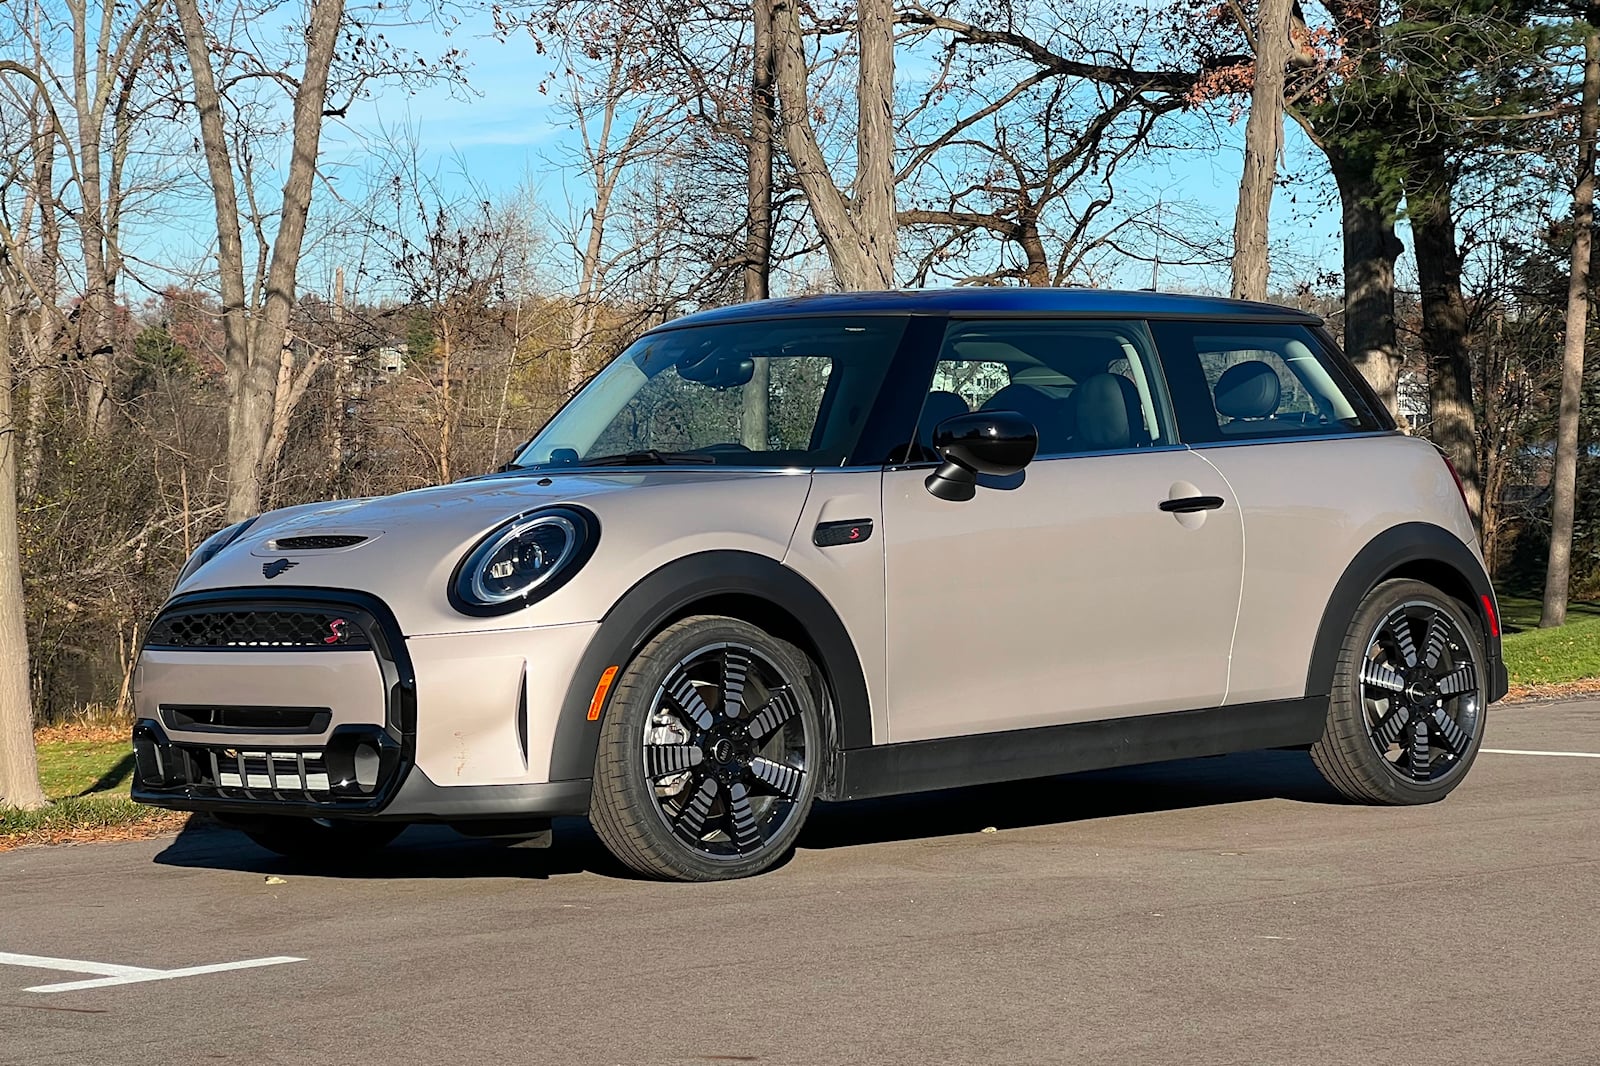 2021 MINI Cooper Review, Ratings, Specs, Prices, and Photos - The